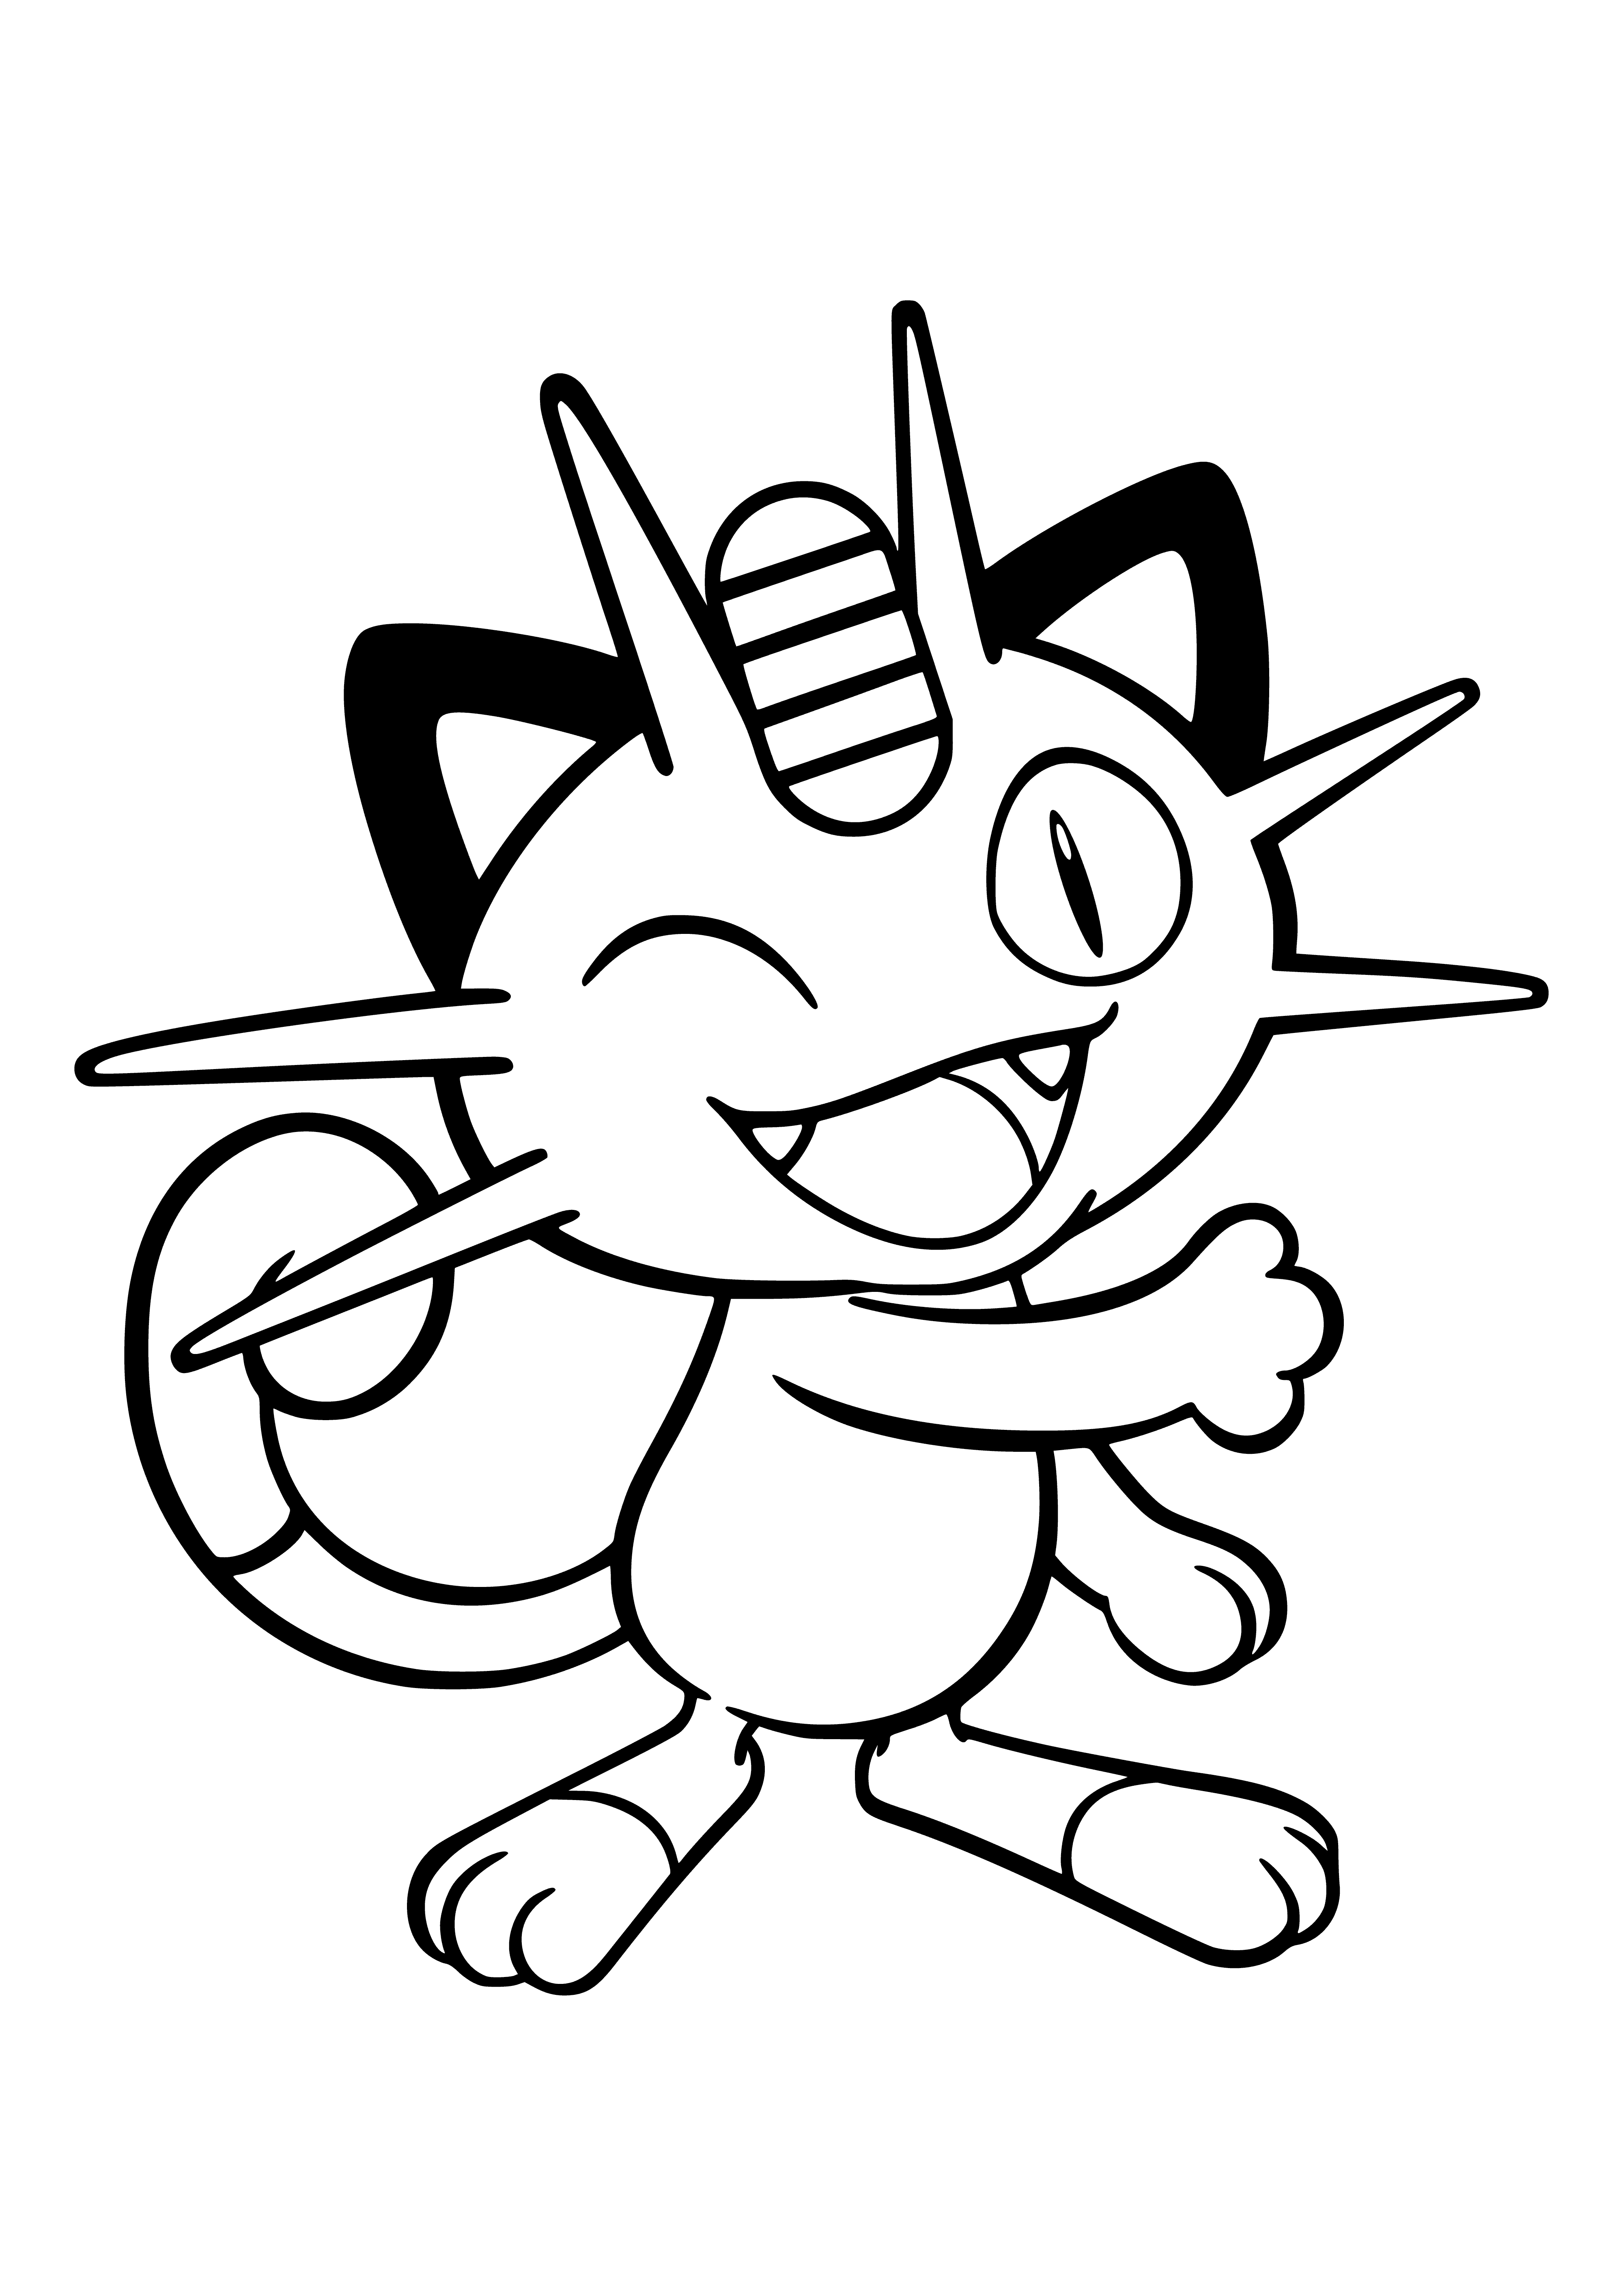 coloring page: A small, quadrupedal Pokémon w/brown coat, cream belly, & black stripes. It has green eyes, triangular black nose, & black spade-tipped tail. Each paw has 3 black claws & can walk on hind legs.